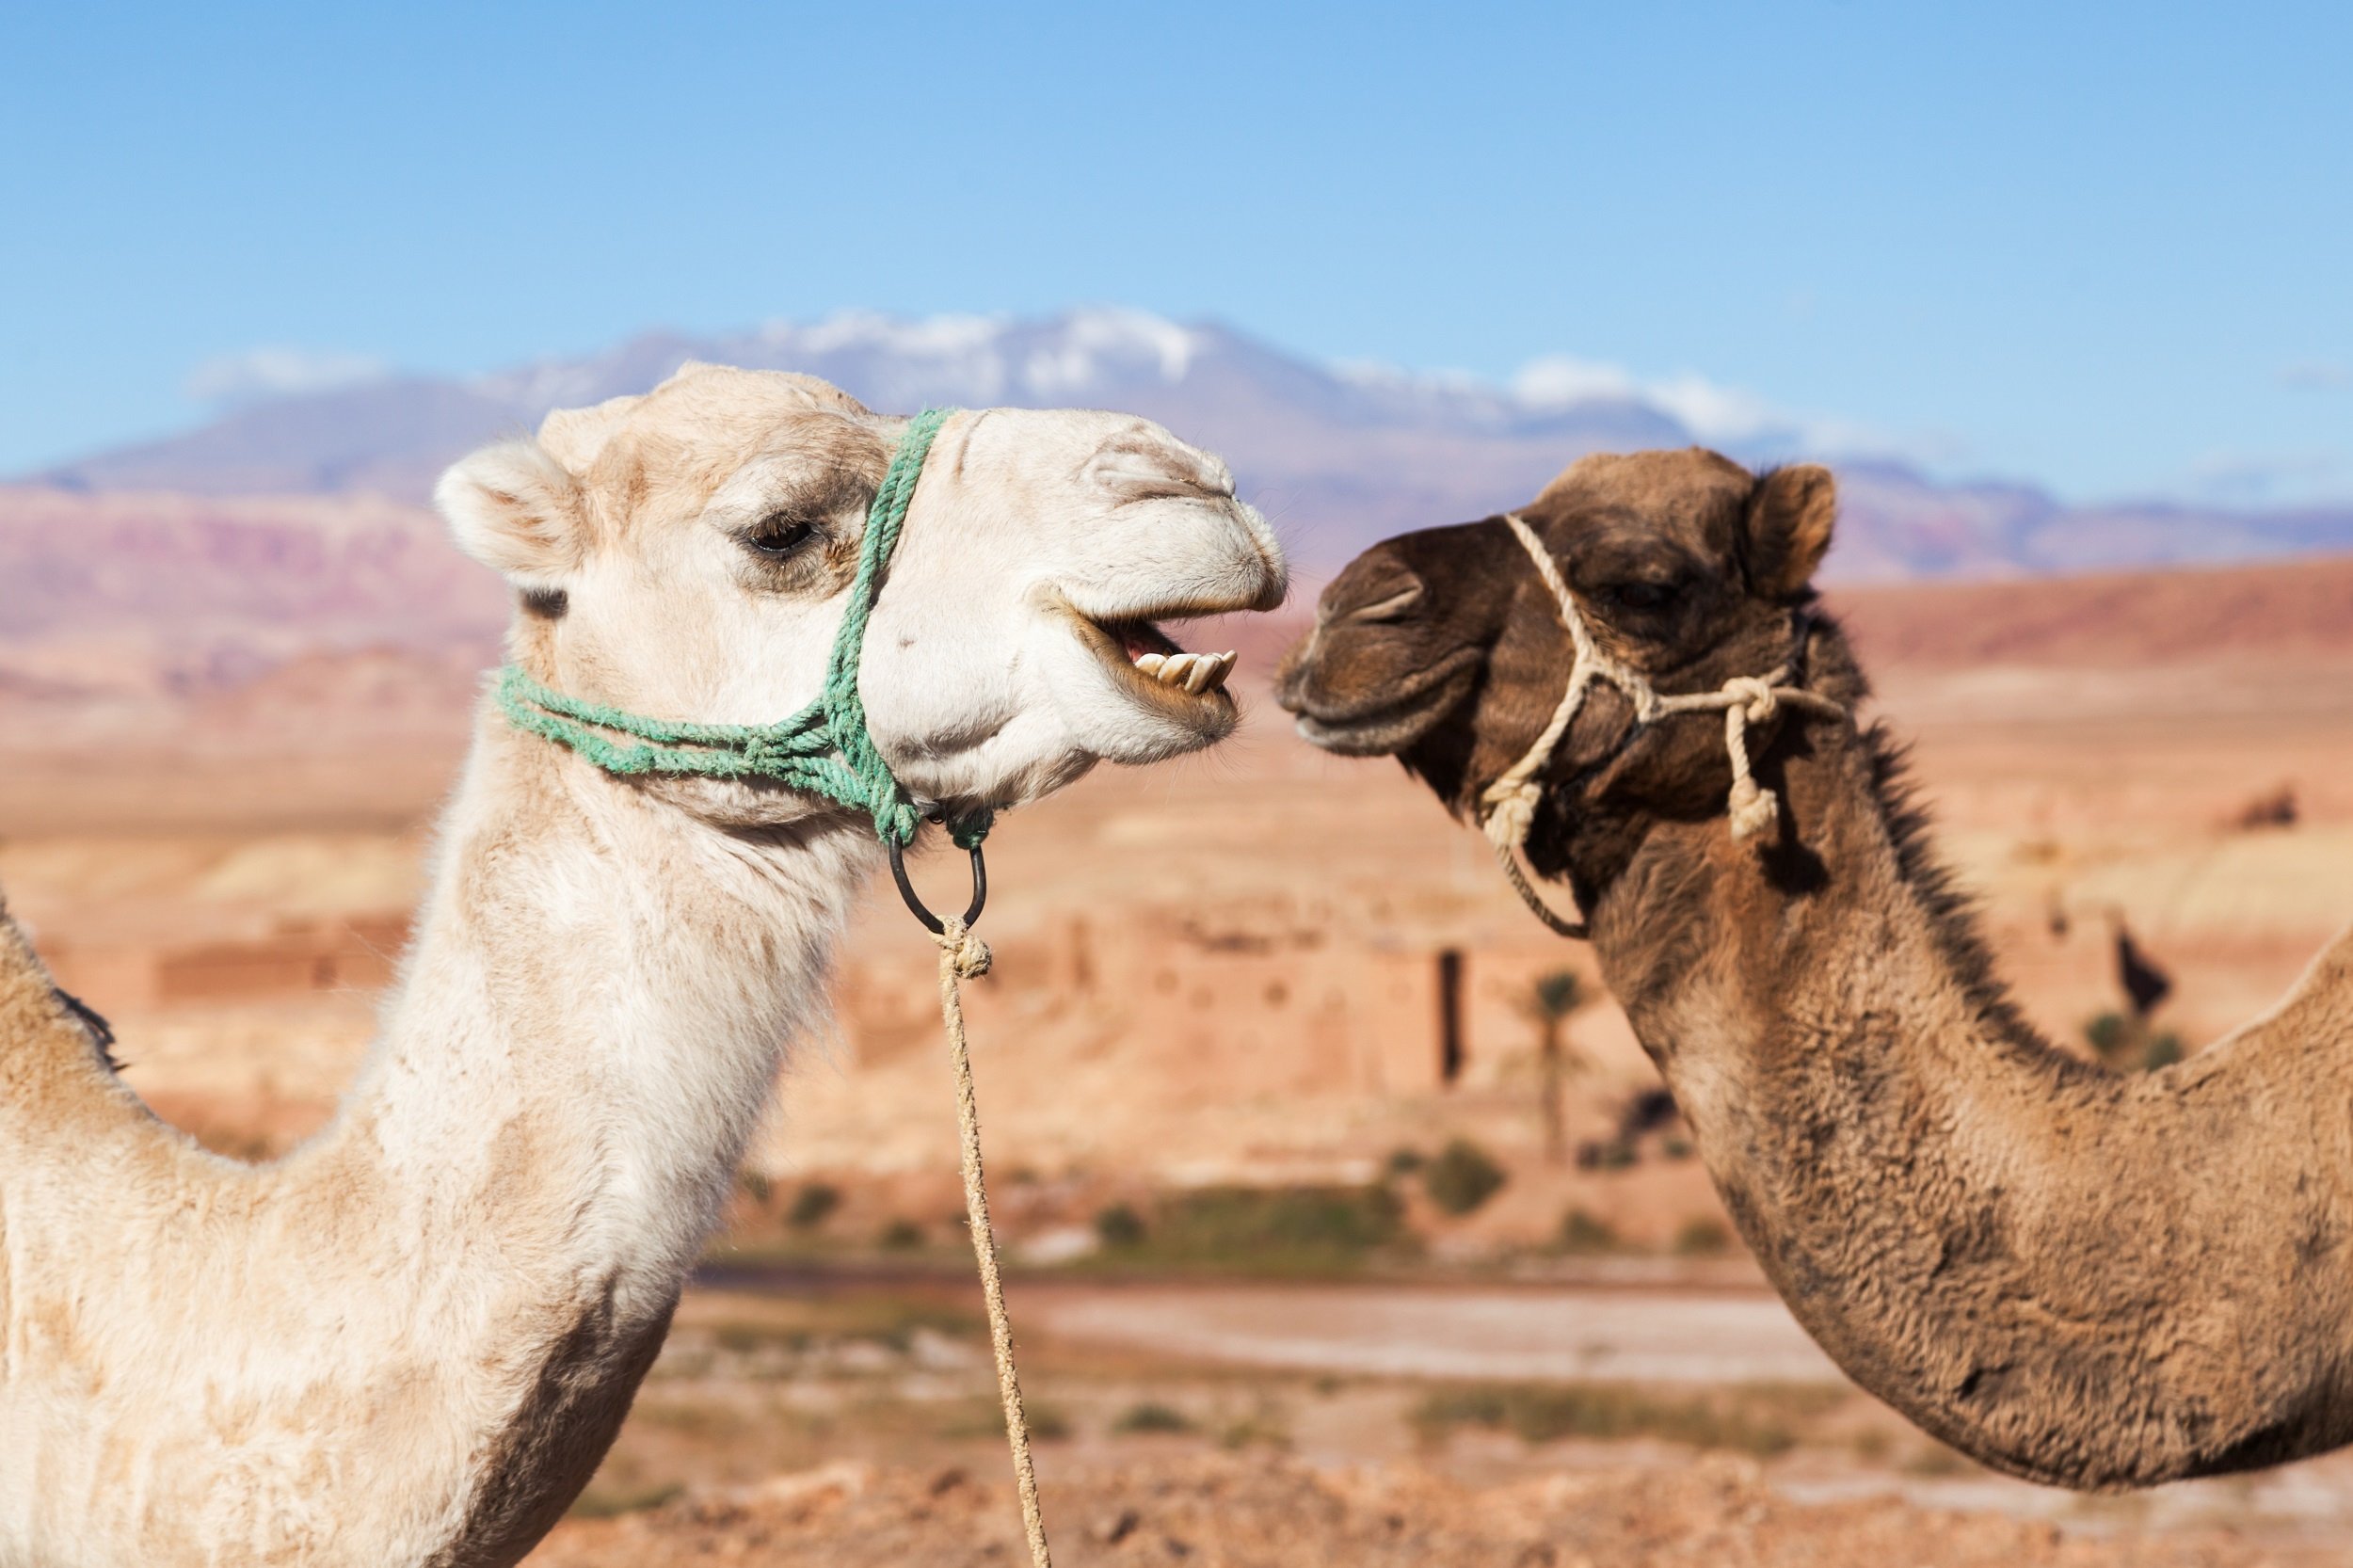 Add A Camel Experience To Your Atlas Mountain Tour From Marrakesh